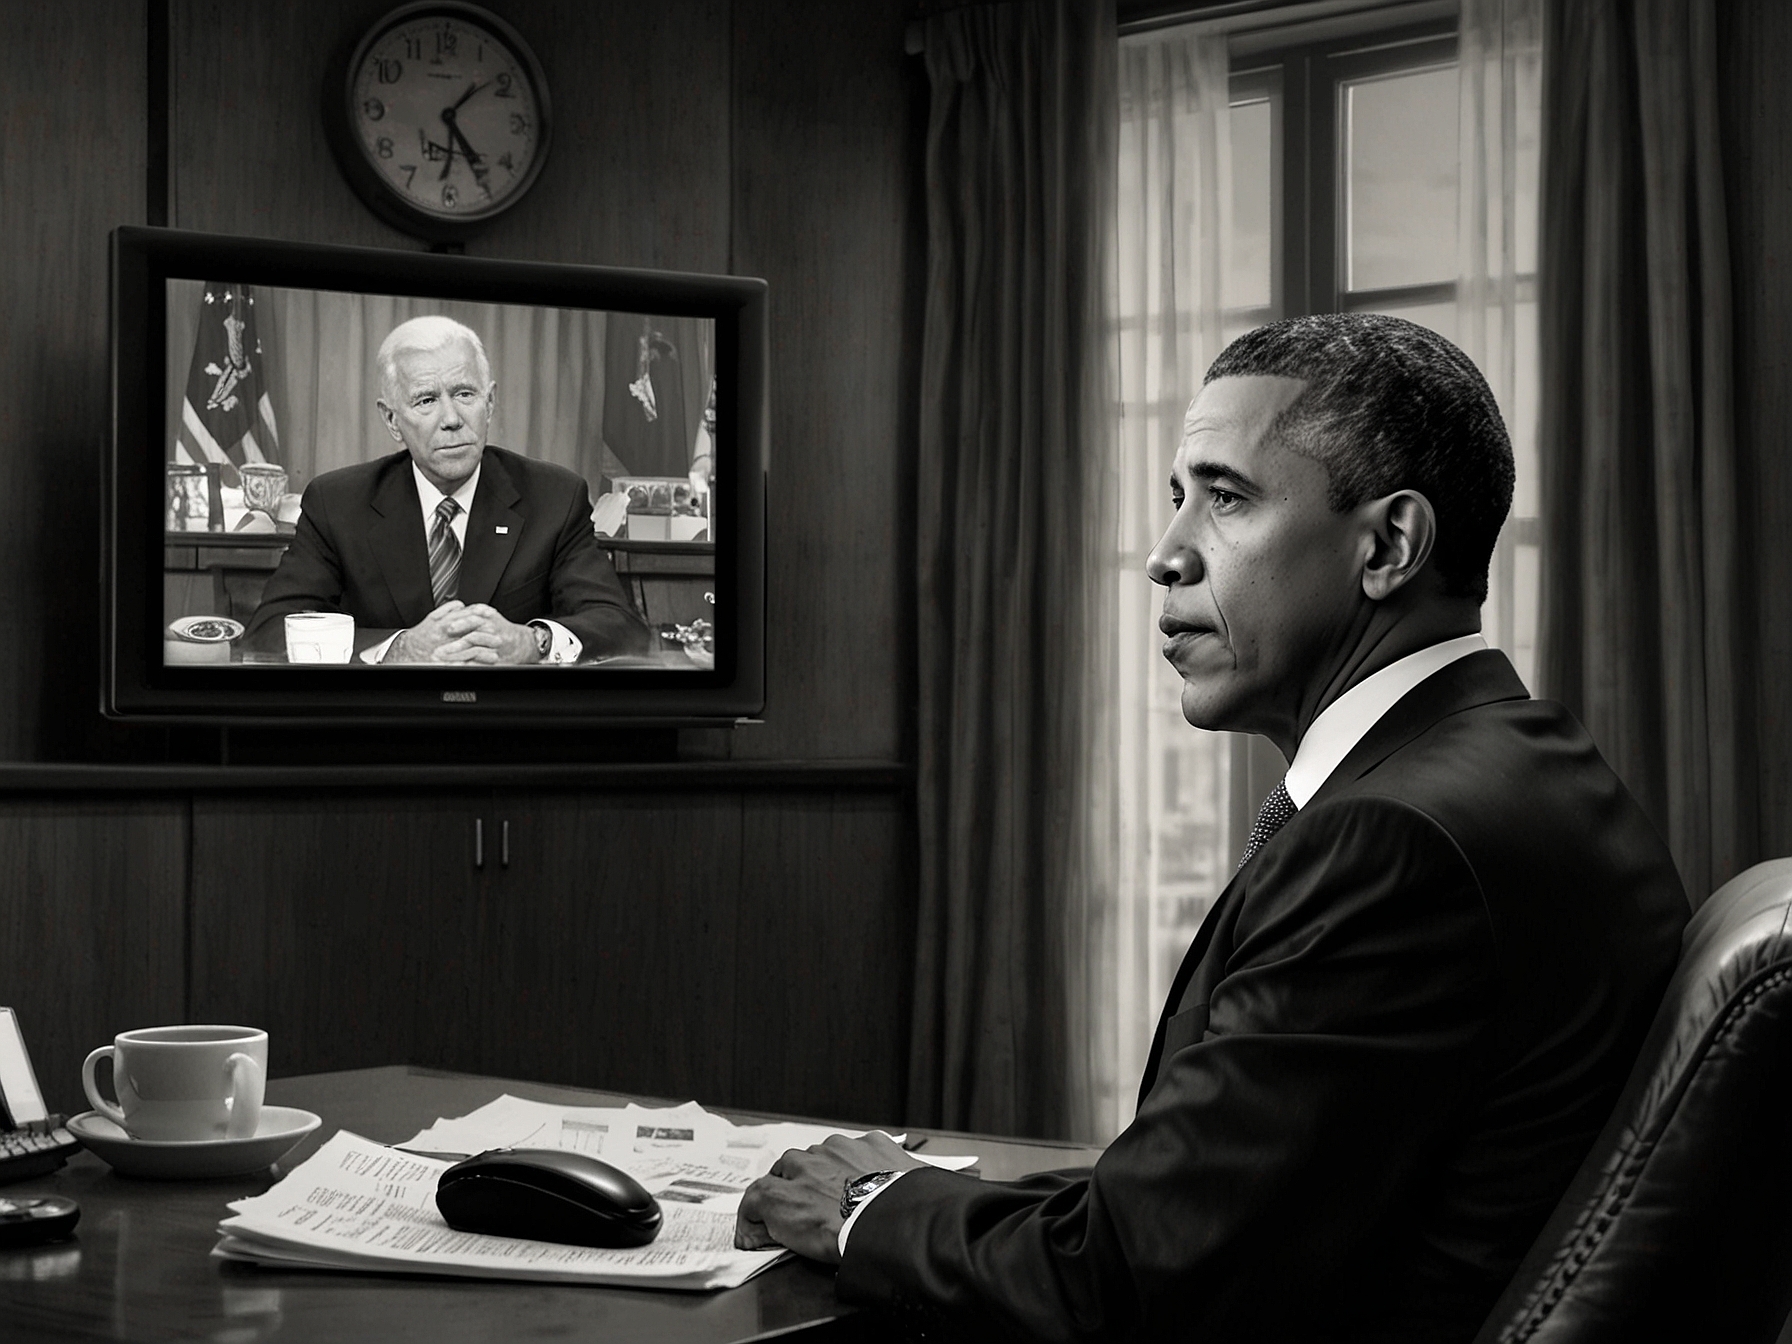 Barack Obama, looking concerned, watches television news coverage on the upcoming CNN debate, illustrating his vested interest and the high stakes involved in Biden's performance.